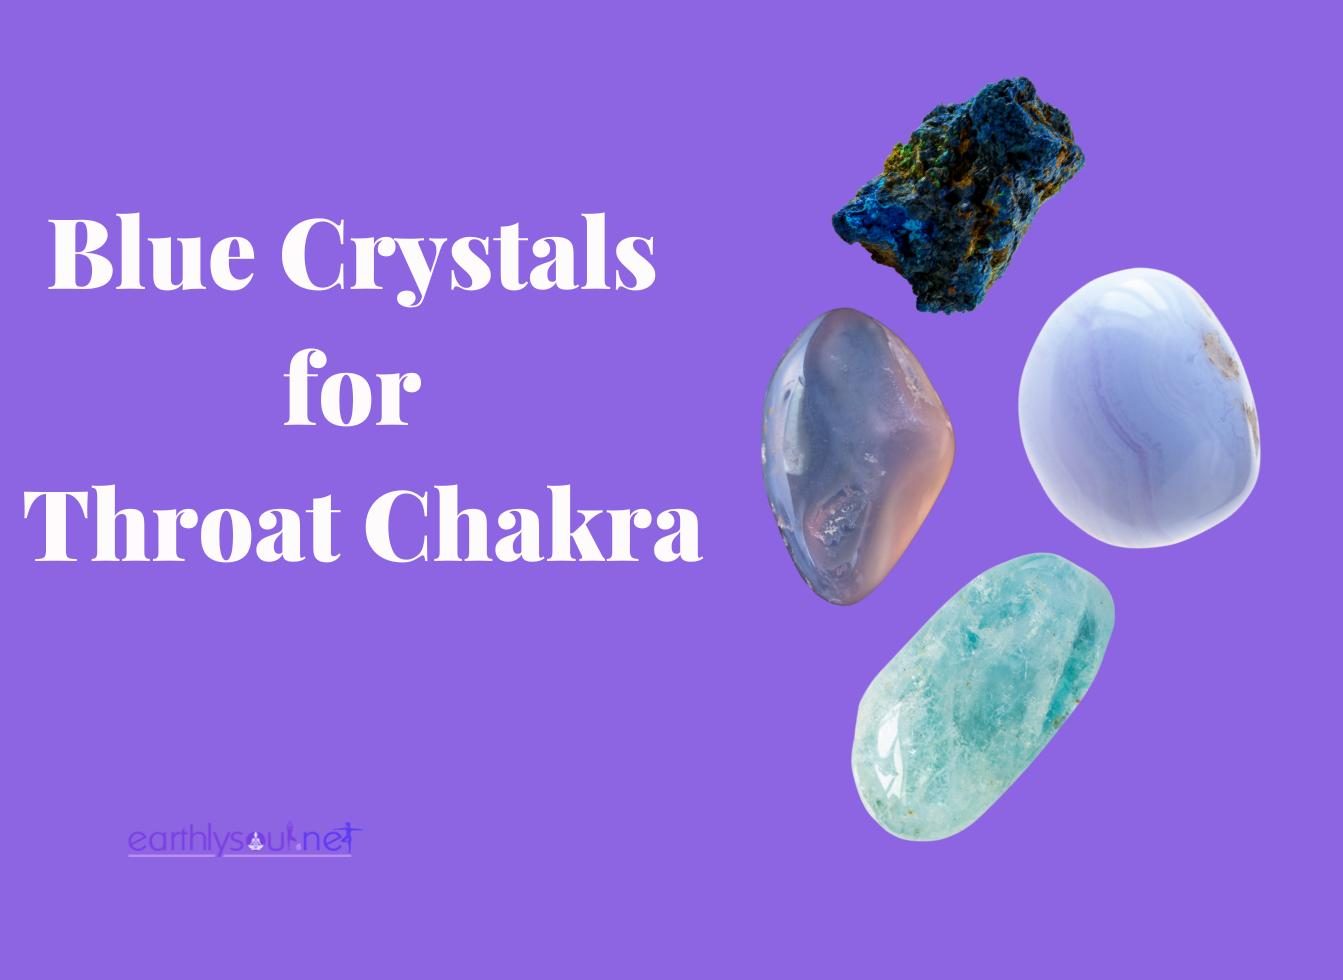 Featured image for blue crystals for throat chakra showing picture of blue lace agate, aquarmarine, blue chalcedony